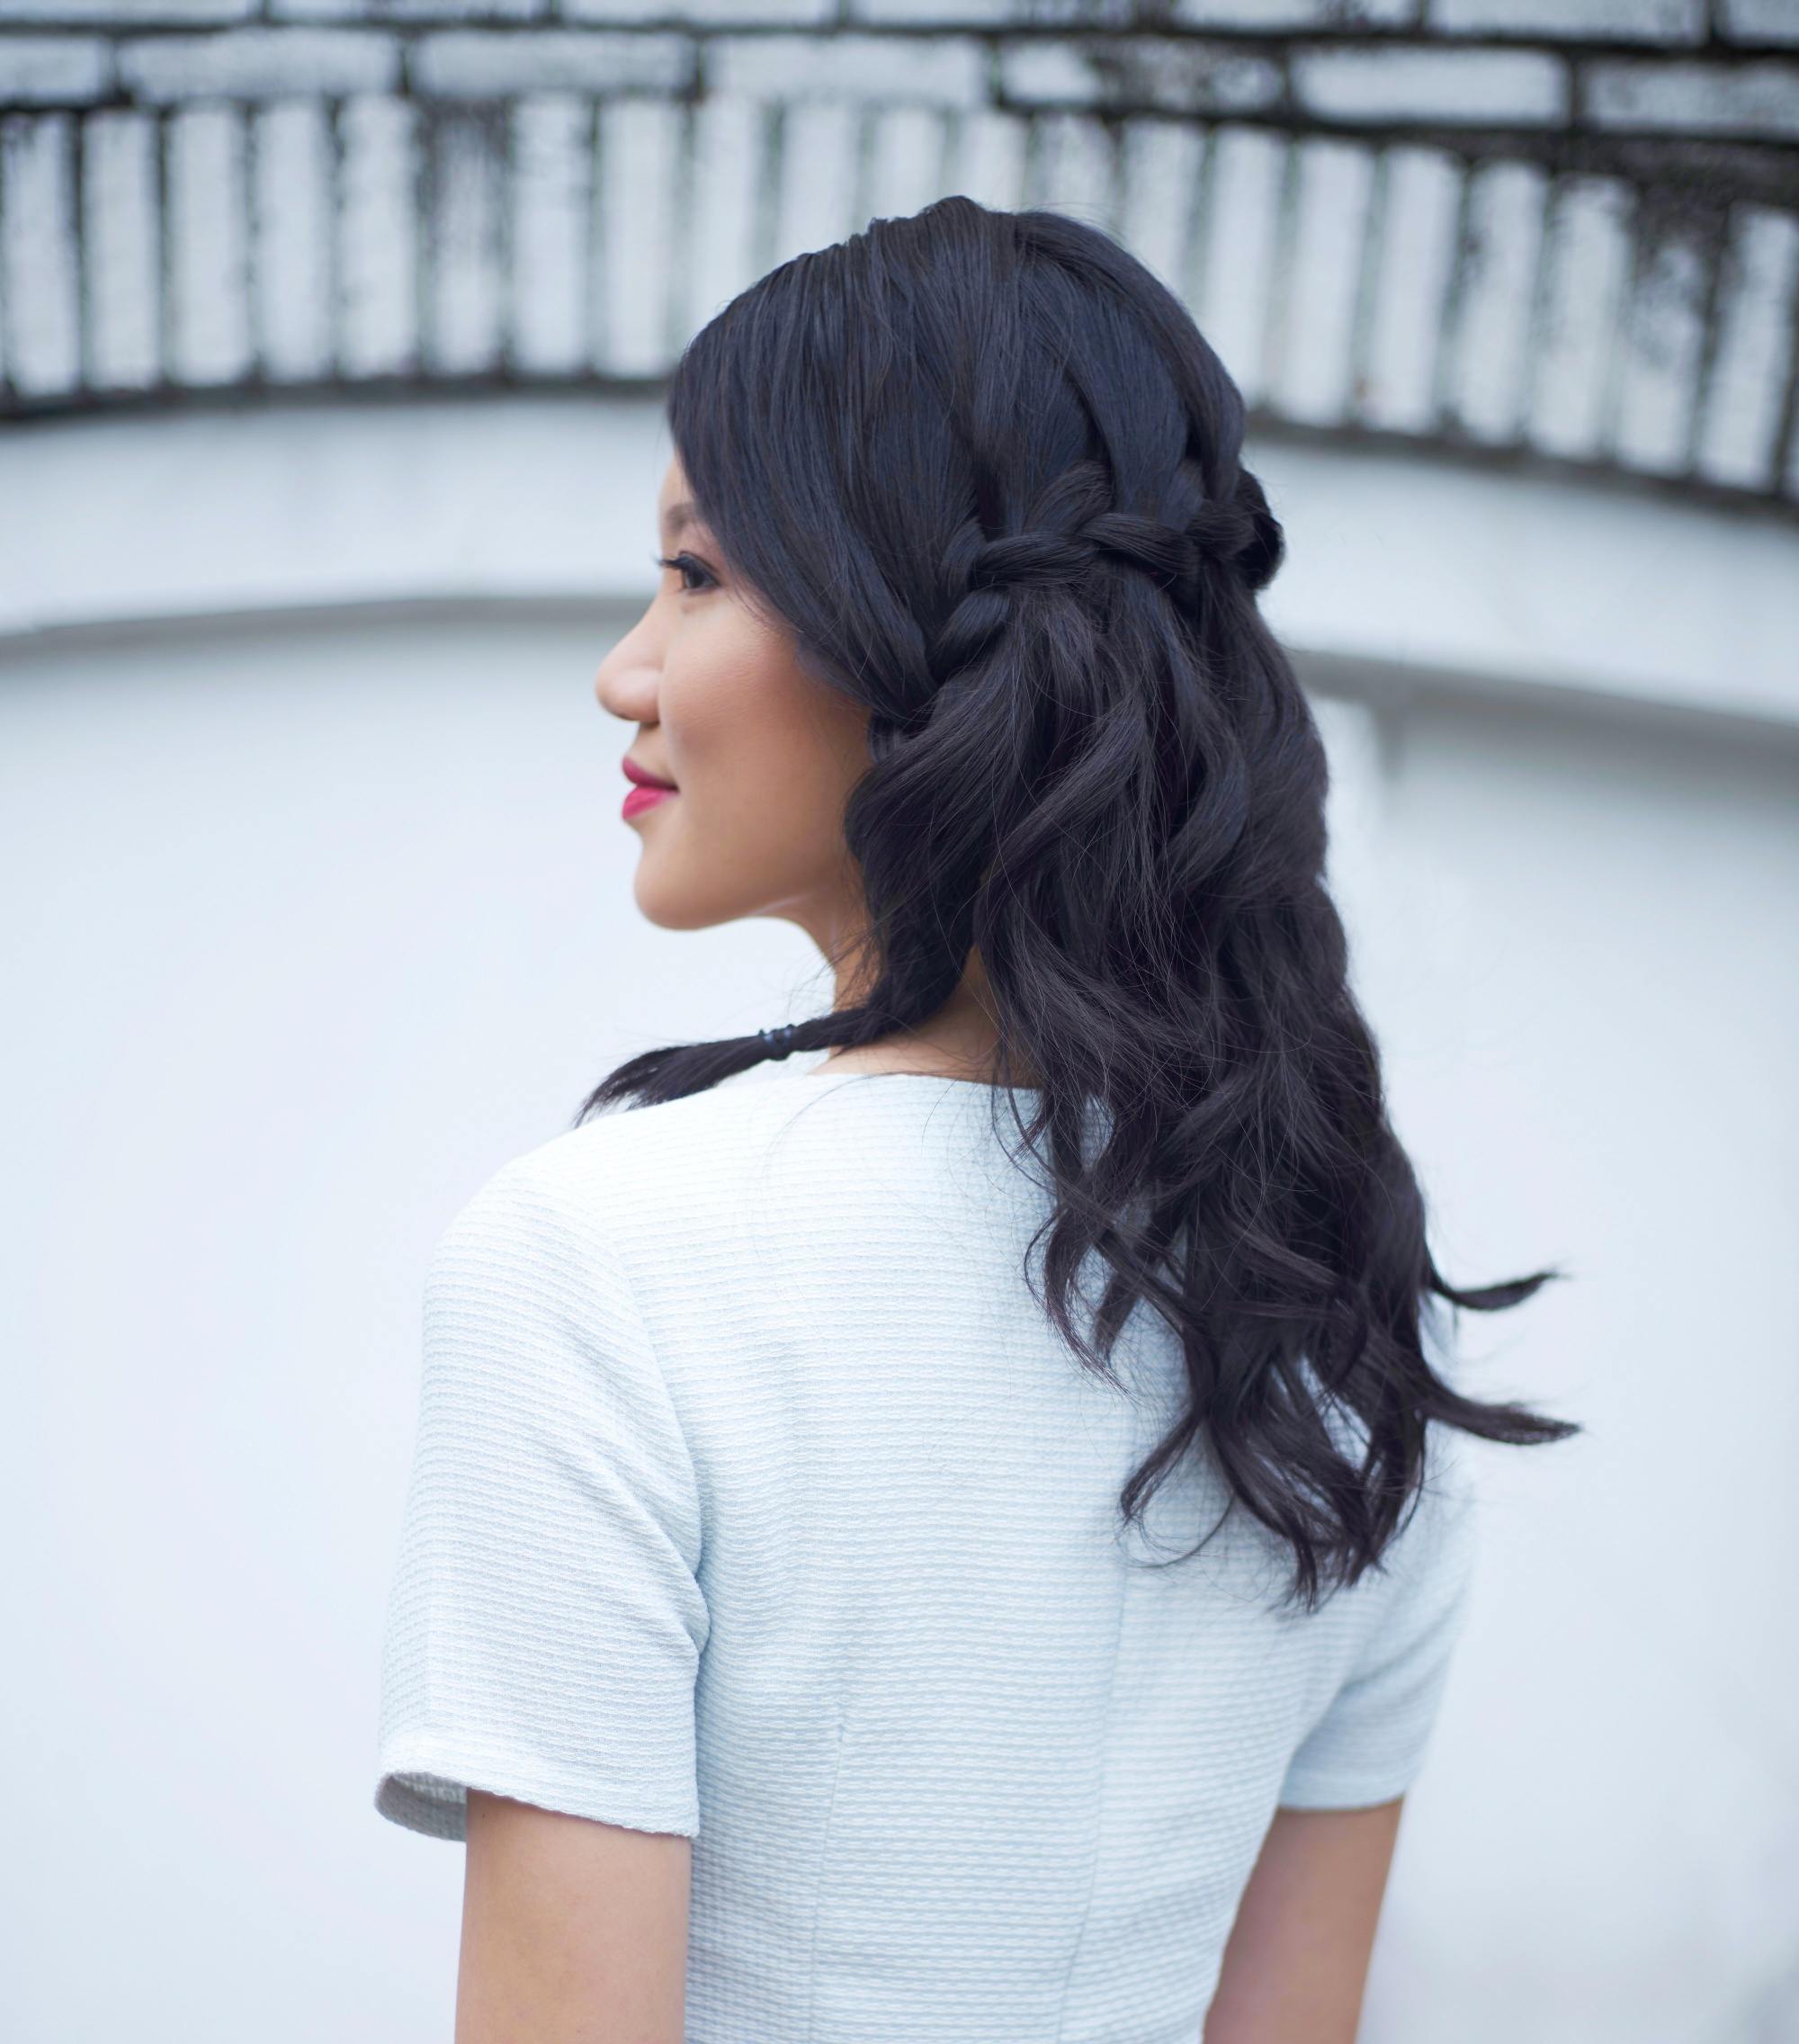 Prom hairstyles for Filipinas: Back shot of an Asian woman with shoulder length black hair in waterfall braid wearing a white dress